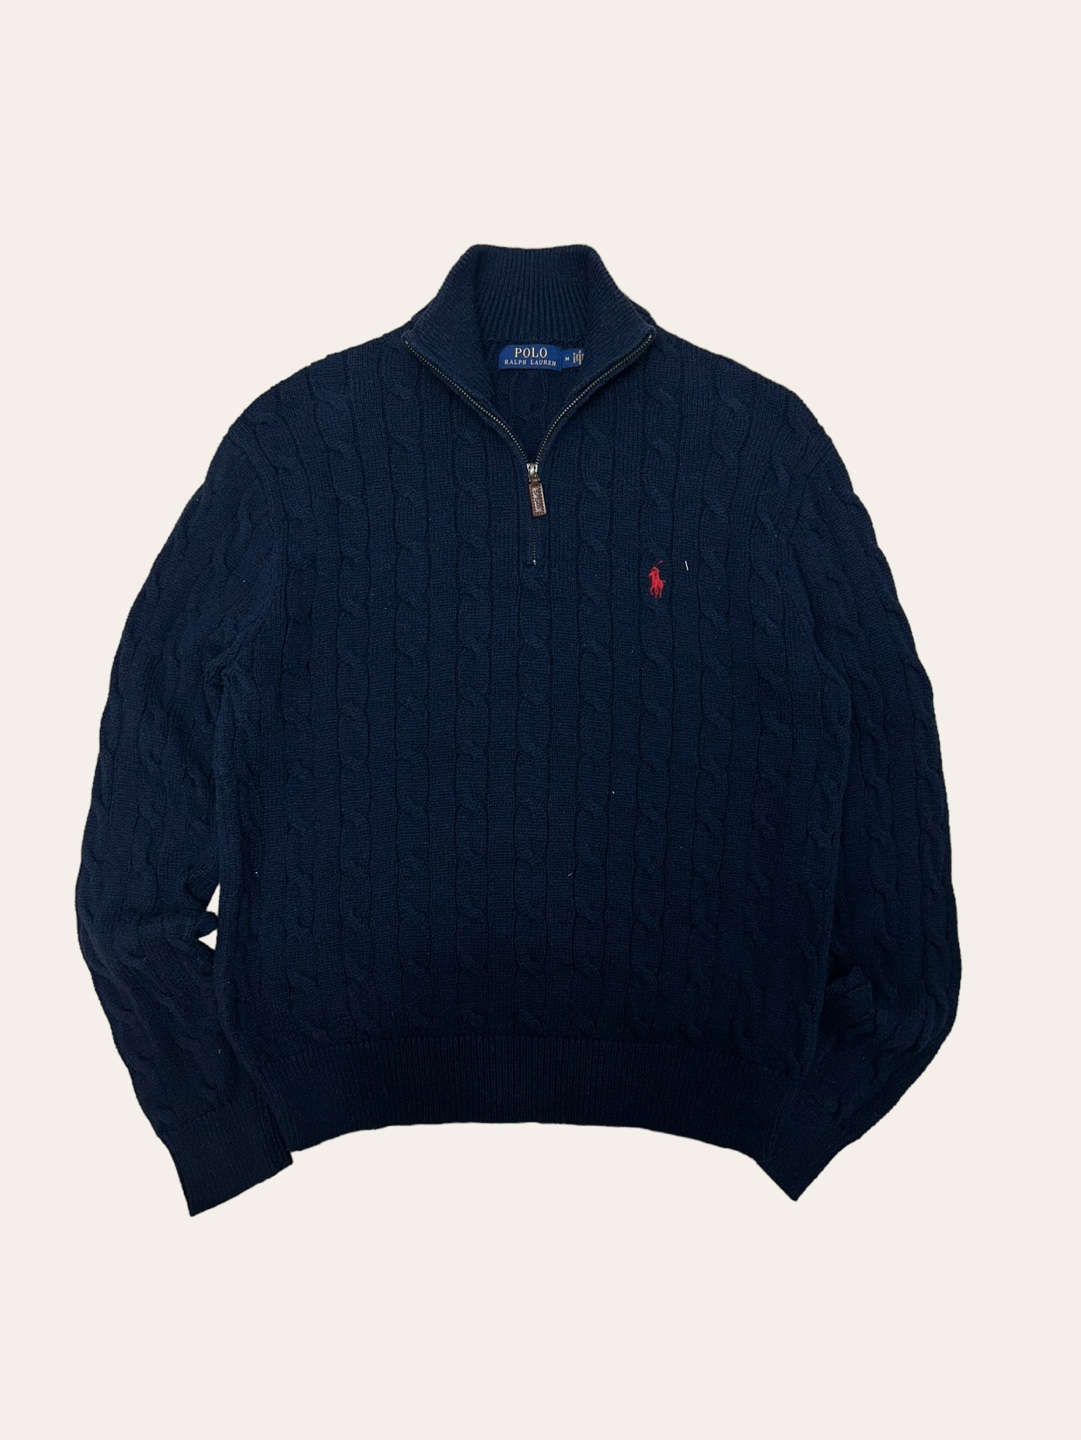 Polo ralph lauren navy cotton cable pullover M